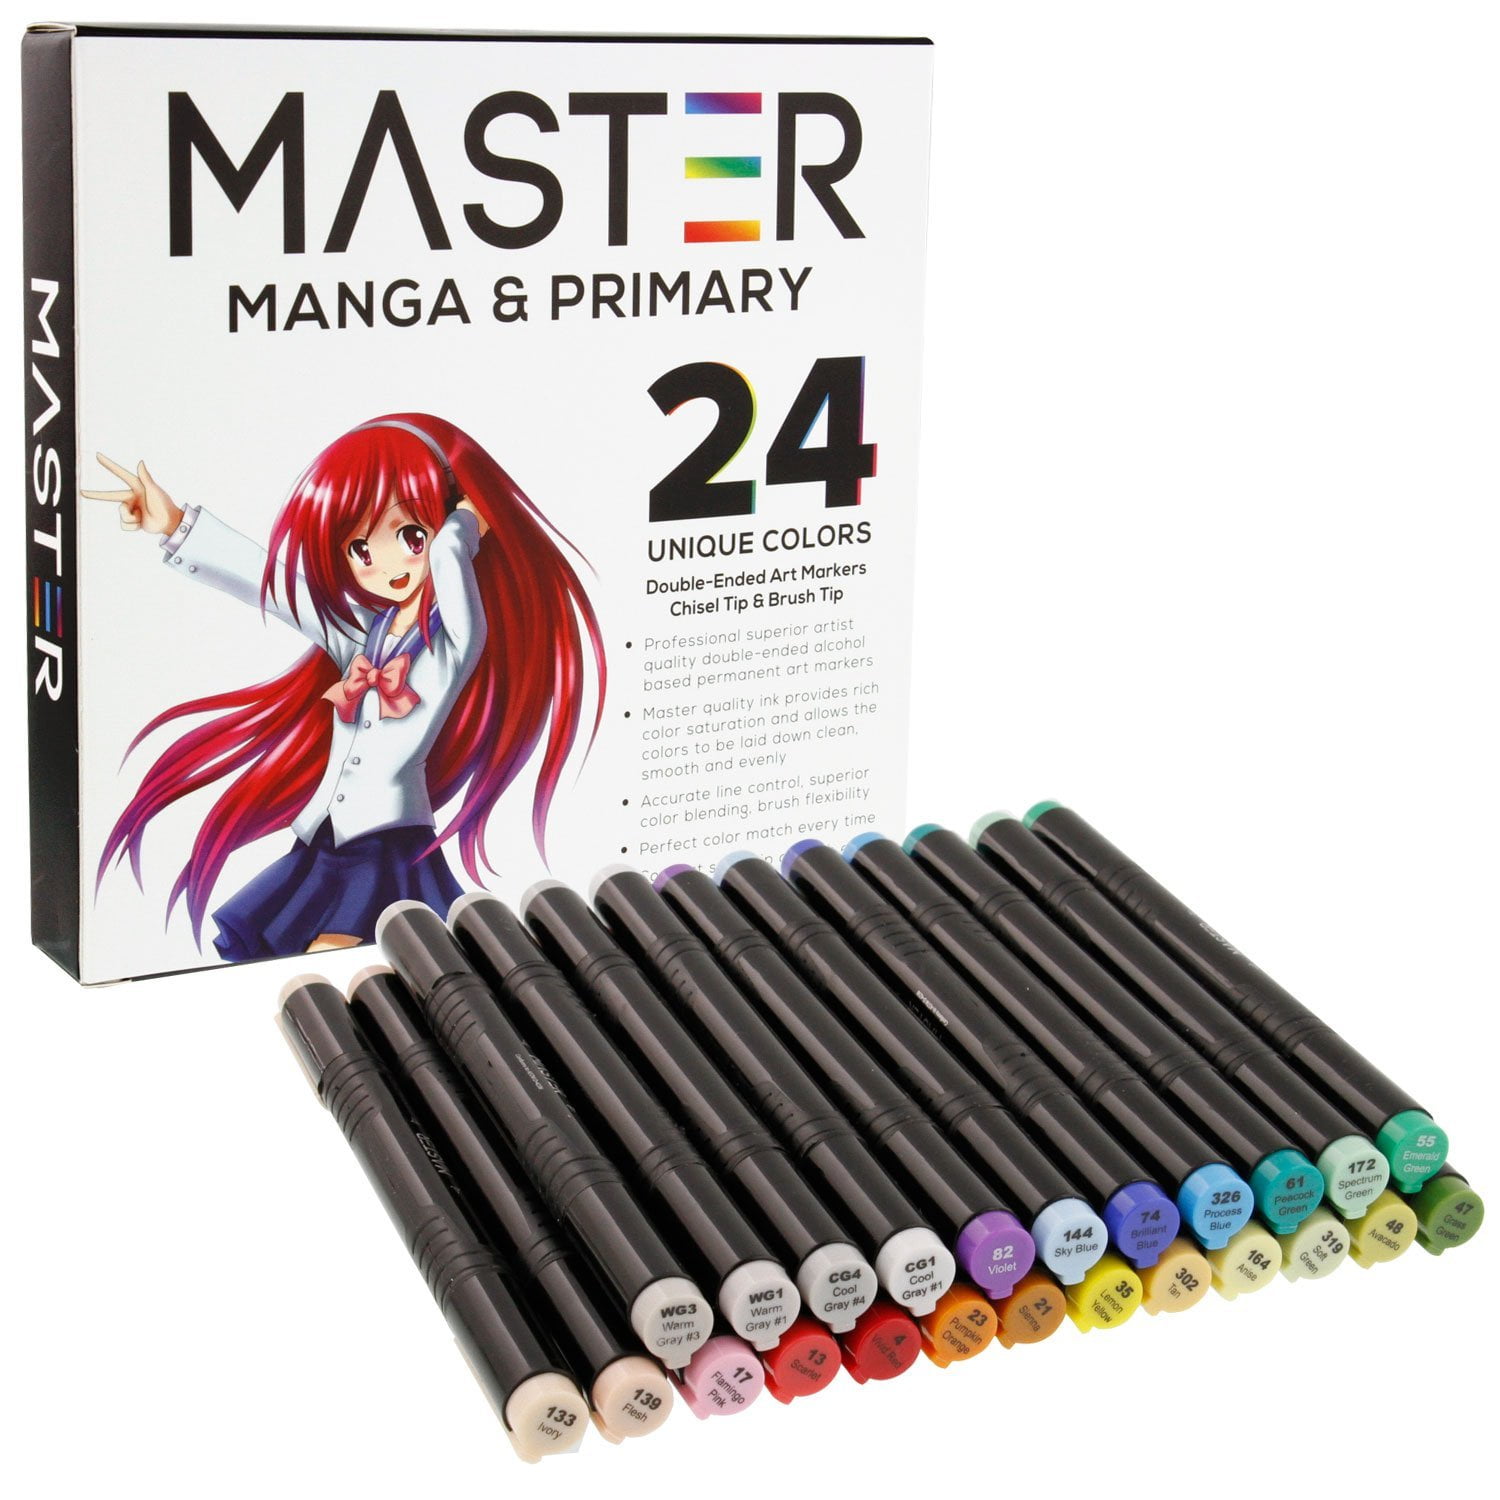 24 Color Markers Manga & Primary Tones Dual Tip Set Double-Ended Art Chisel Point and Standard Brush - Walmart.com